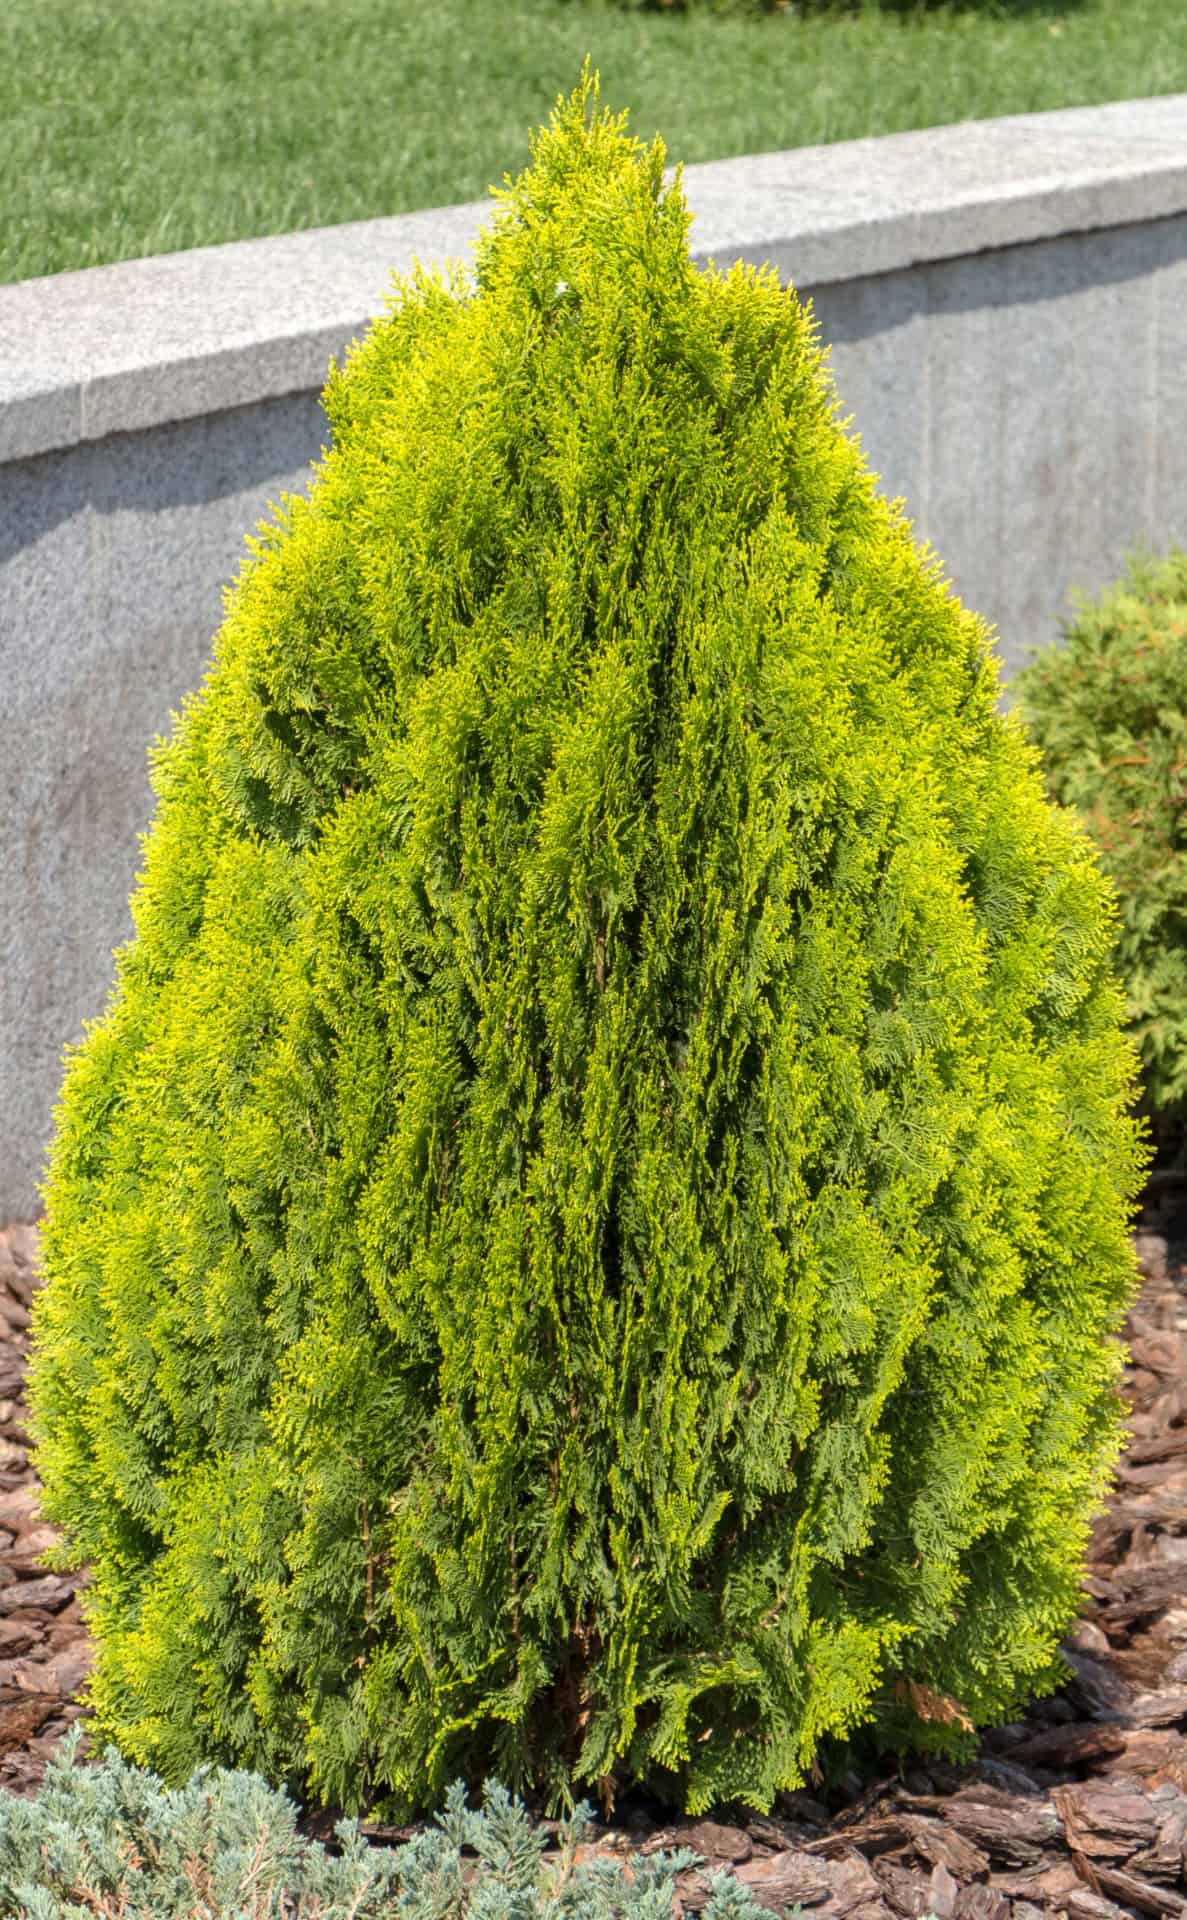 Small Evergreen Trees For Landscaping, Dwarf Evergreen For Landscaping